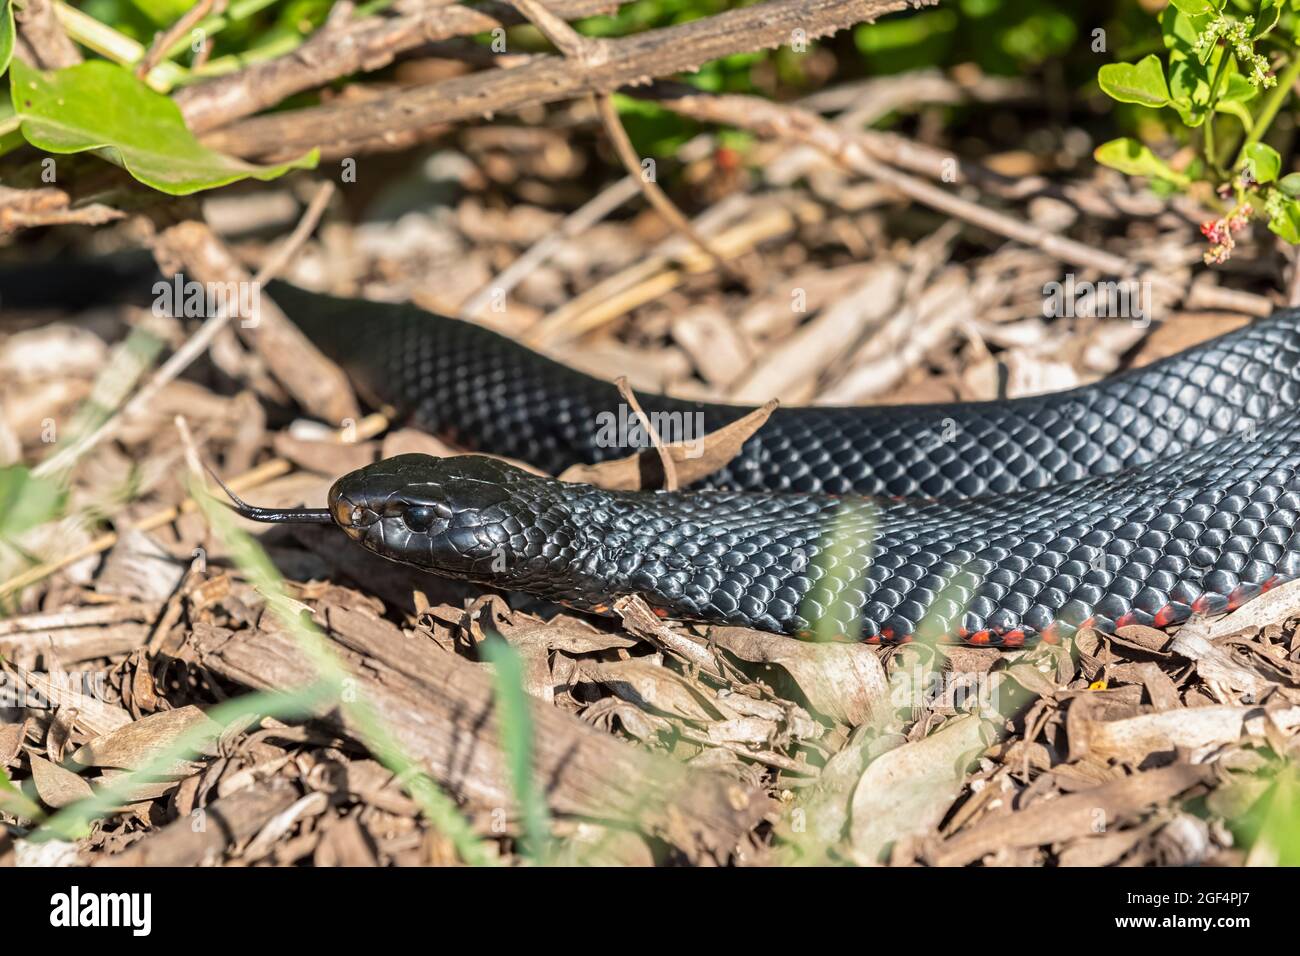 Red-bellied black snake (Pseudechis porphyriacus) Stock Photo